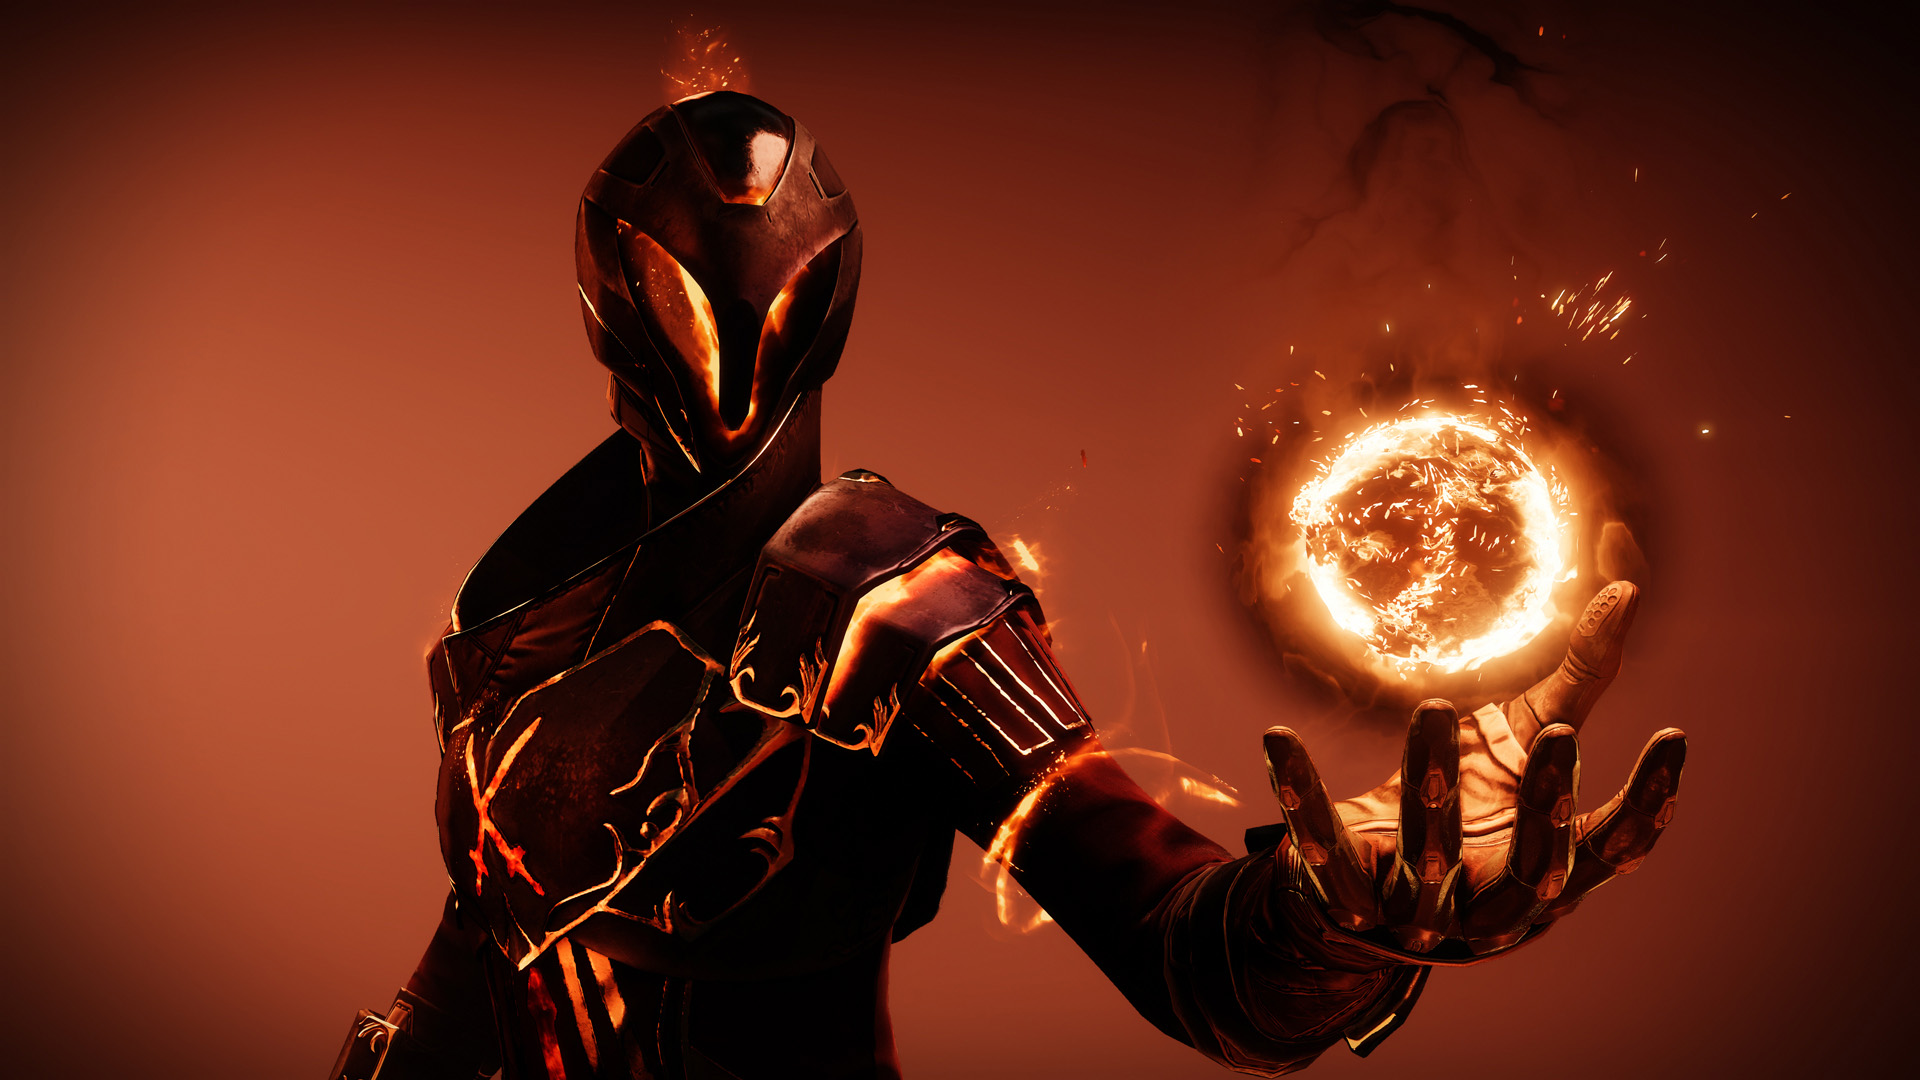 Best Destiny 2 Warlock builds for PvP and PvE in Solar 3.0